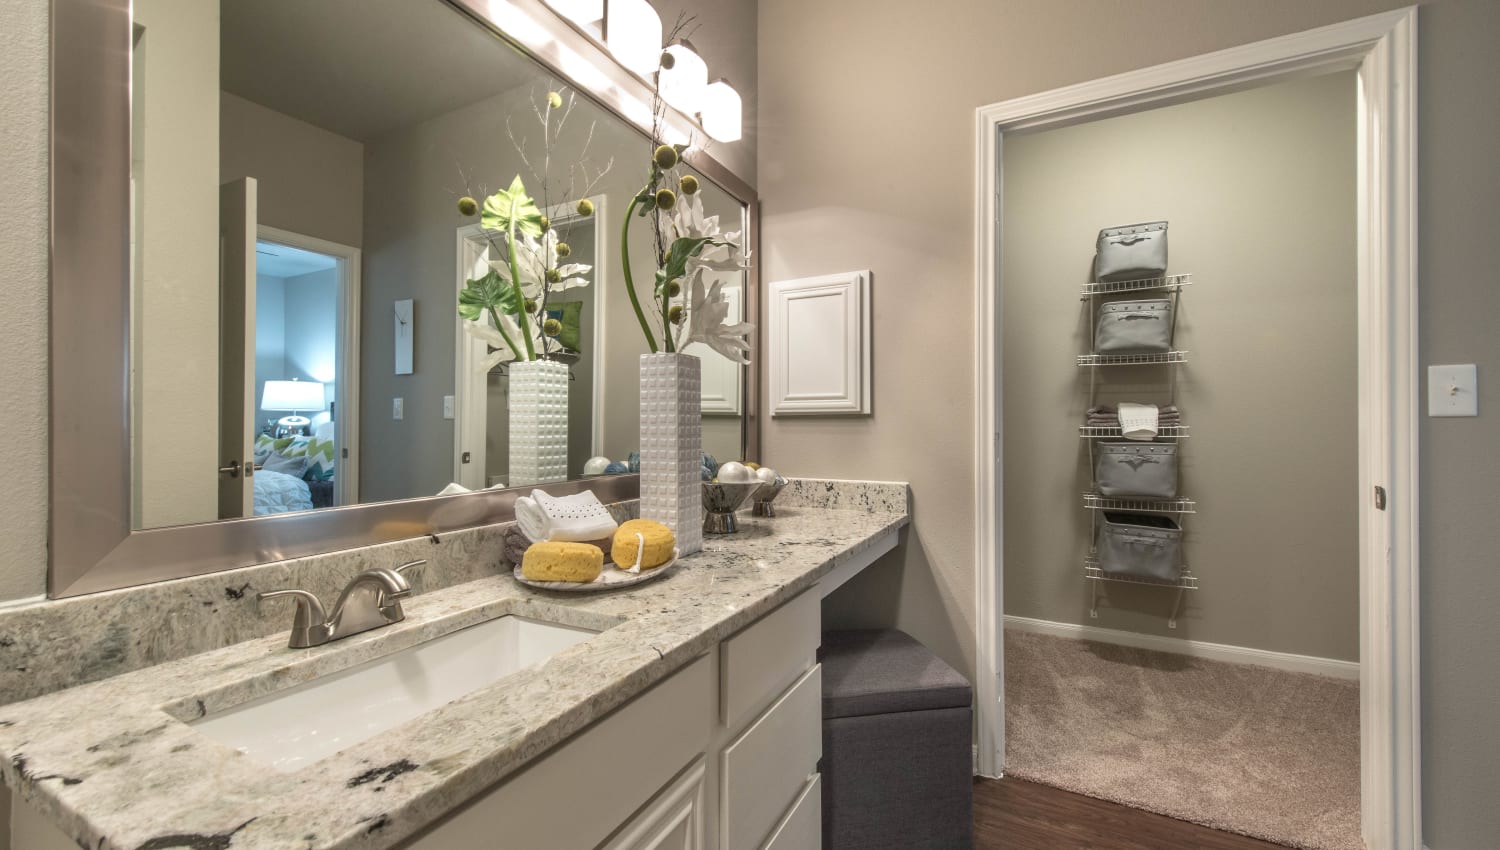 Guest bathroom with a granite countertop in a model home at Olympus Las Colinas in Irving, Texas